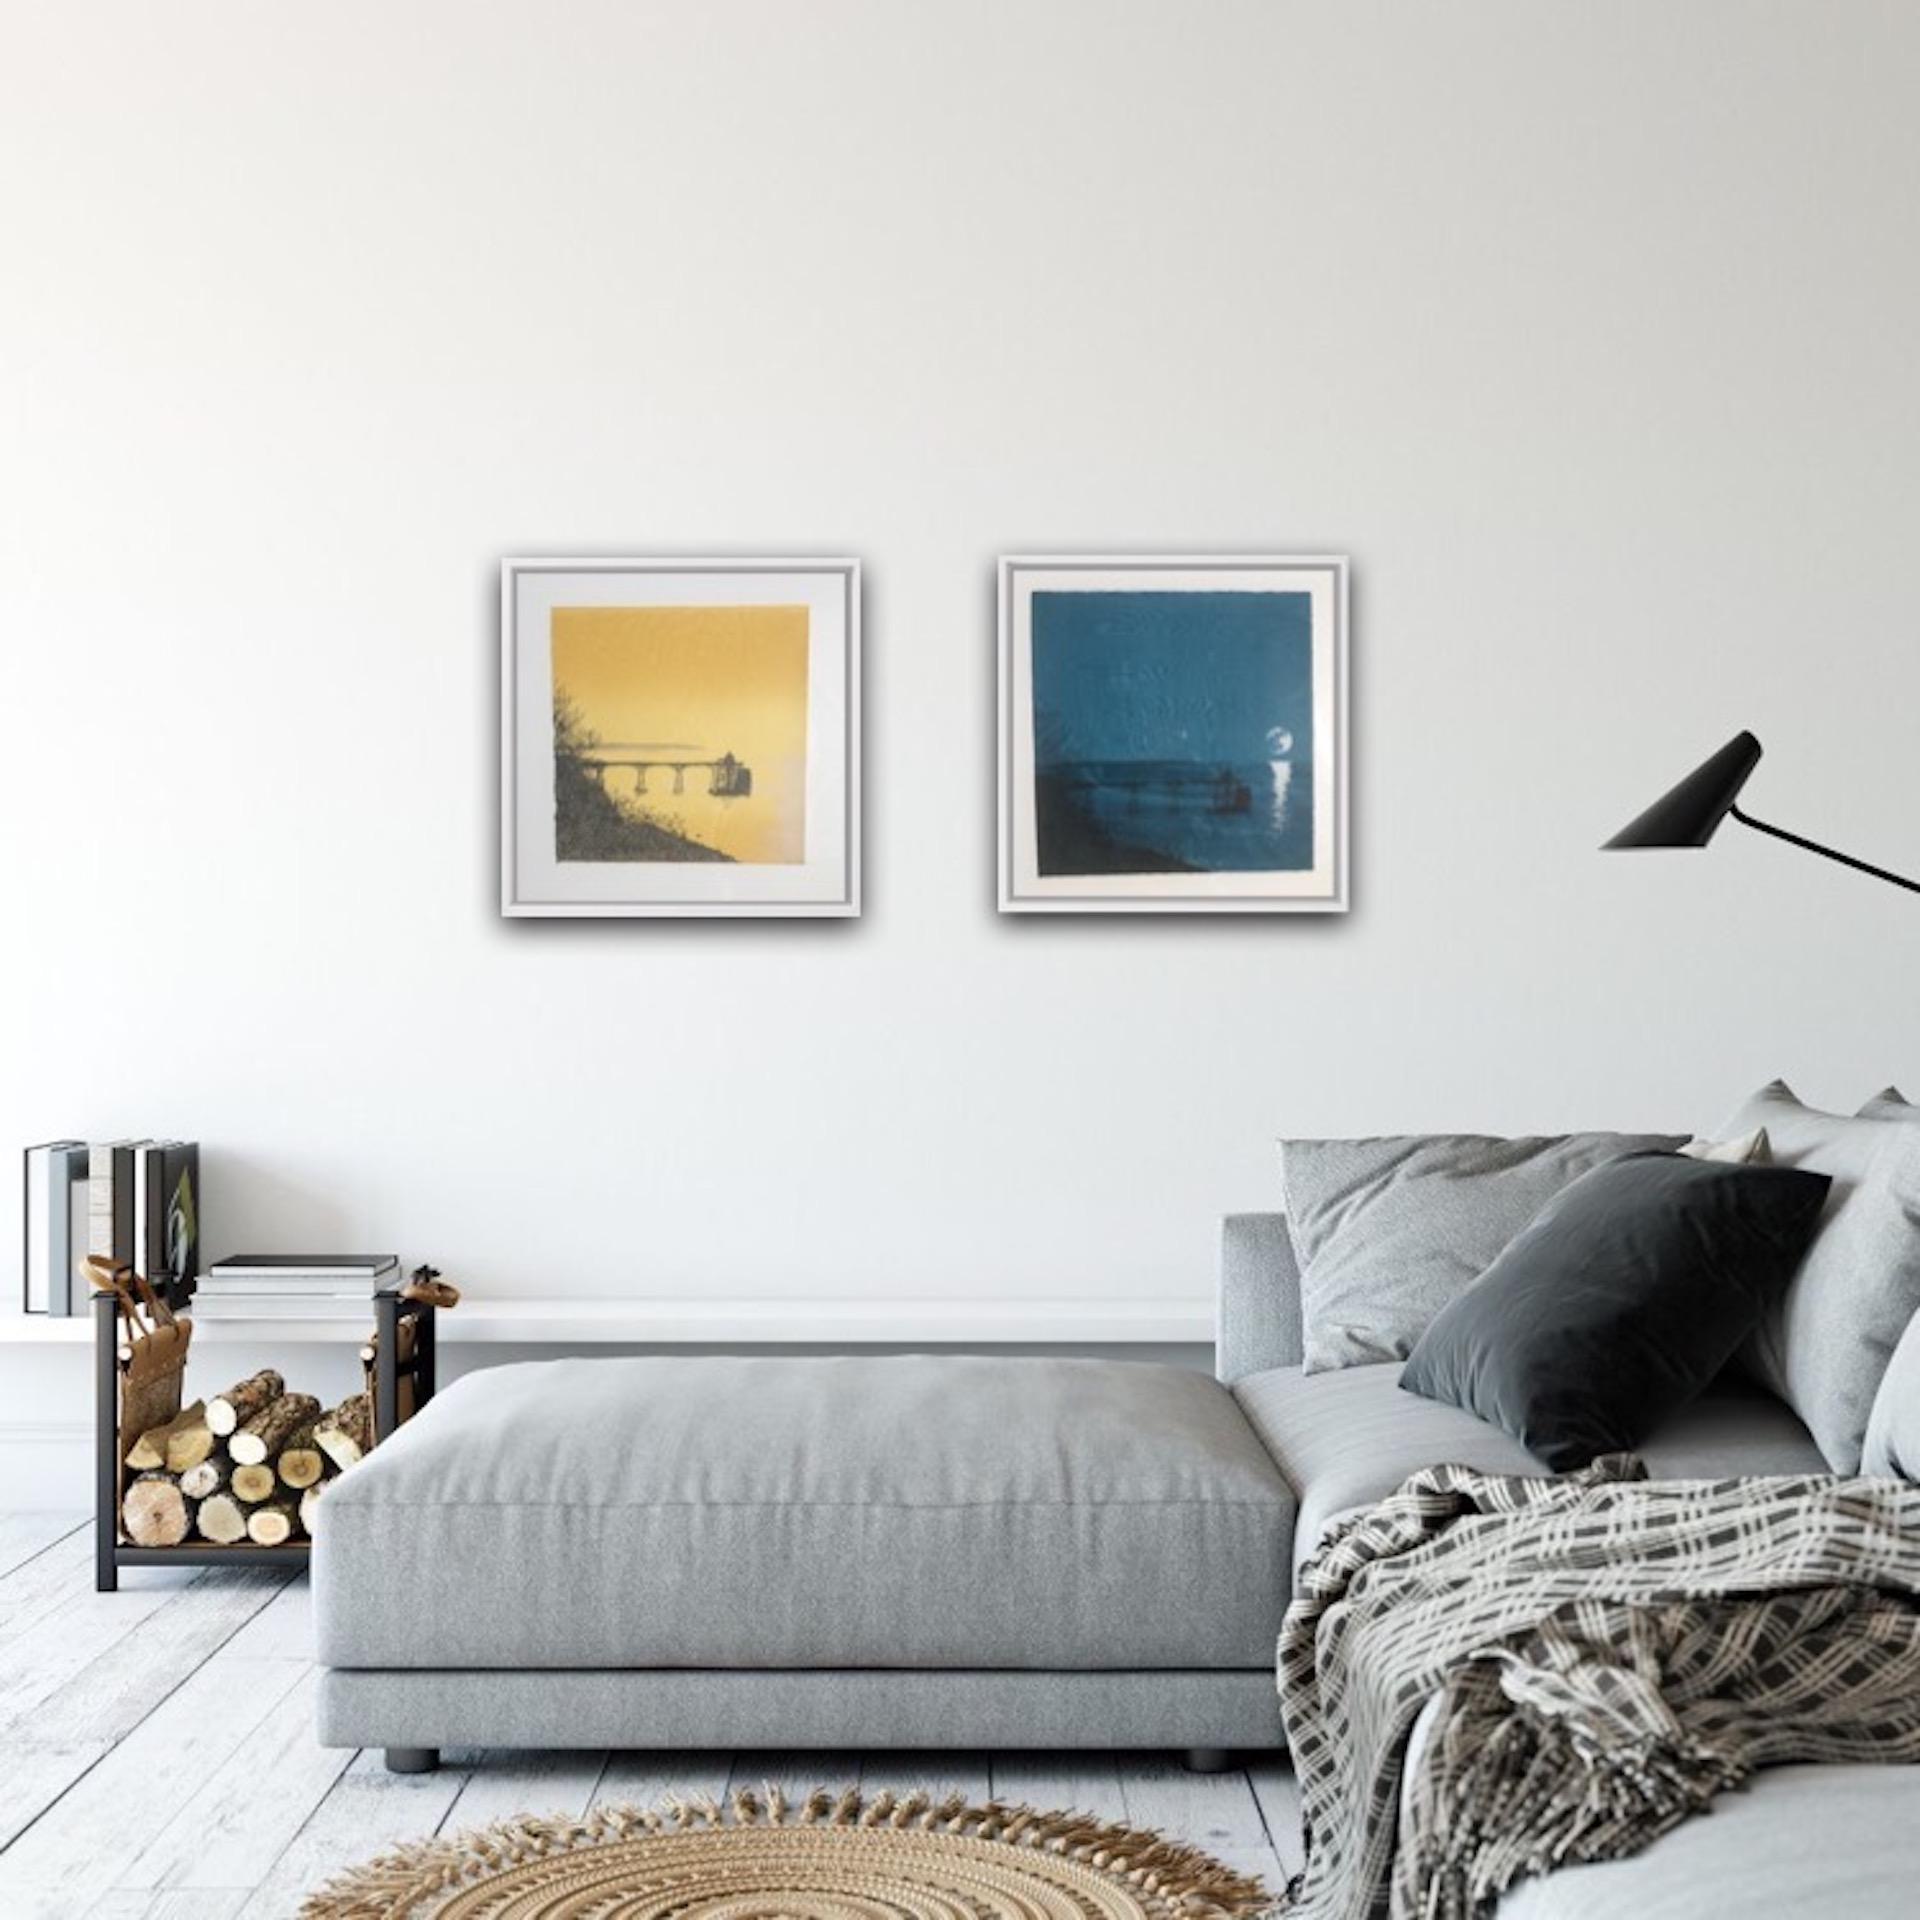 Anna Harley
Cleredon Pier Diptych
Limited Edition Silkscreen Prints
Editions of 30
Individual Sheet Sizes: H 38cm x W 37.5cm x D 0.1cm
Minimum Hanging Space needed : H 43cm x W 81cm
Sold Unframed
Please note that insitu images are purely an